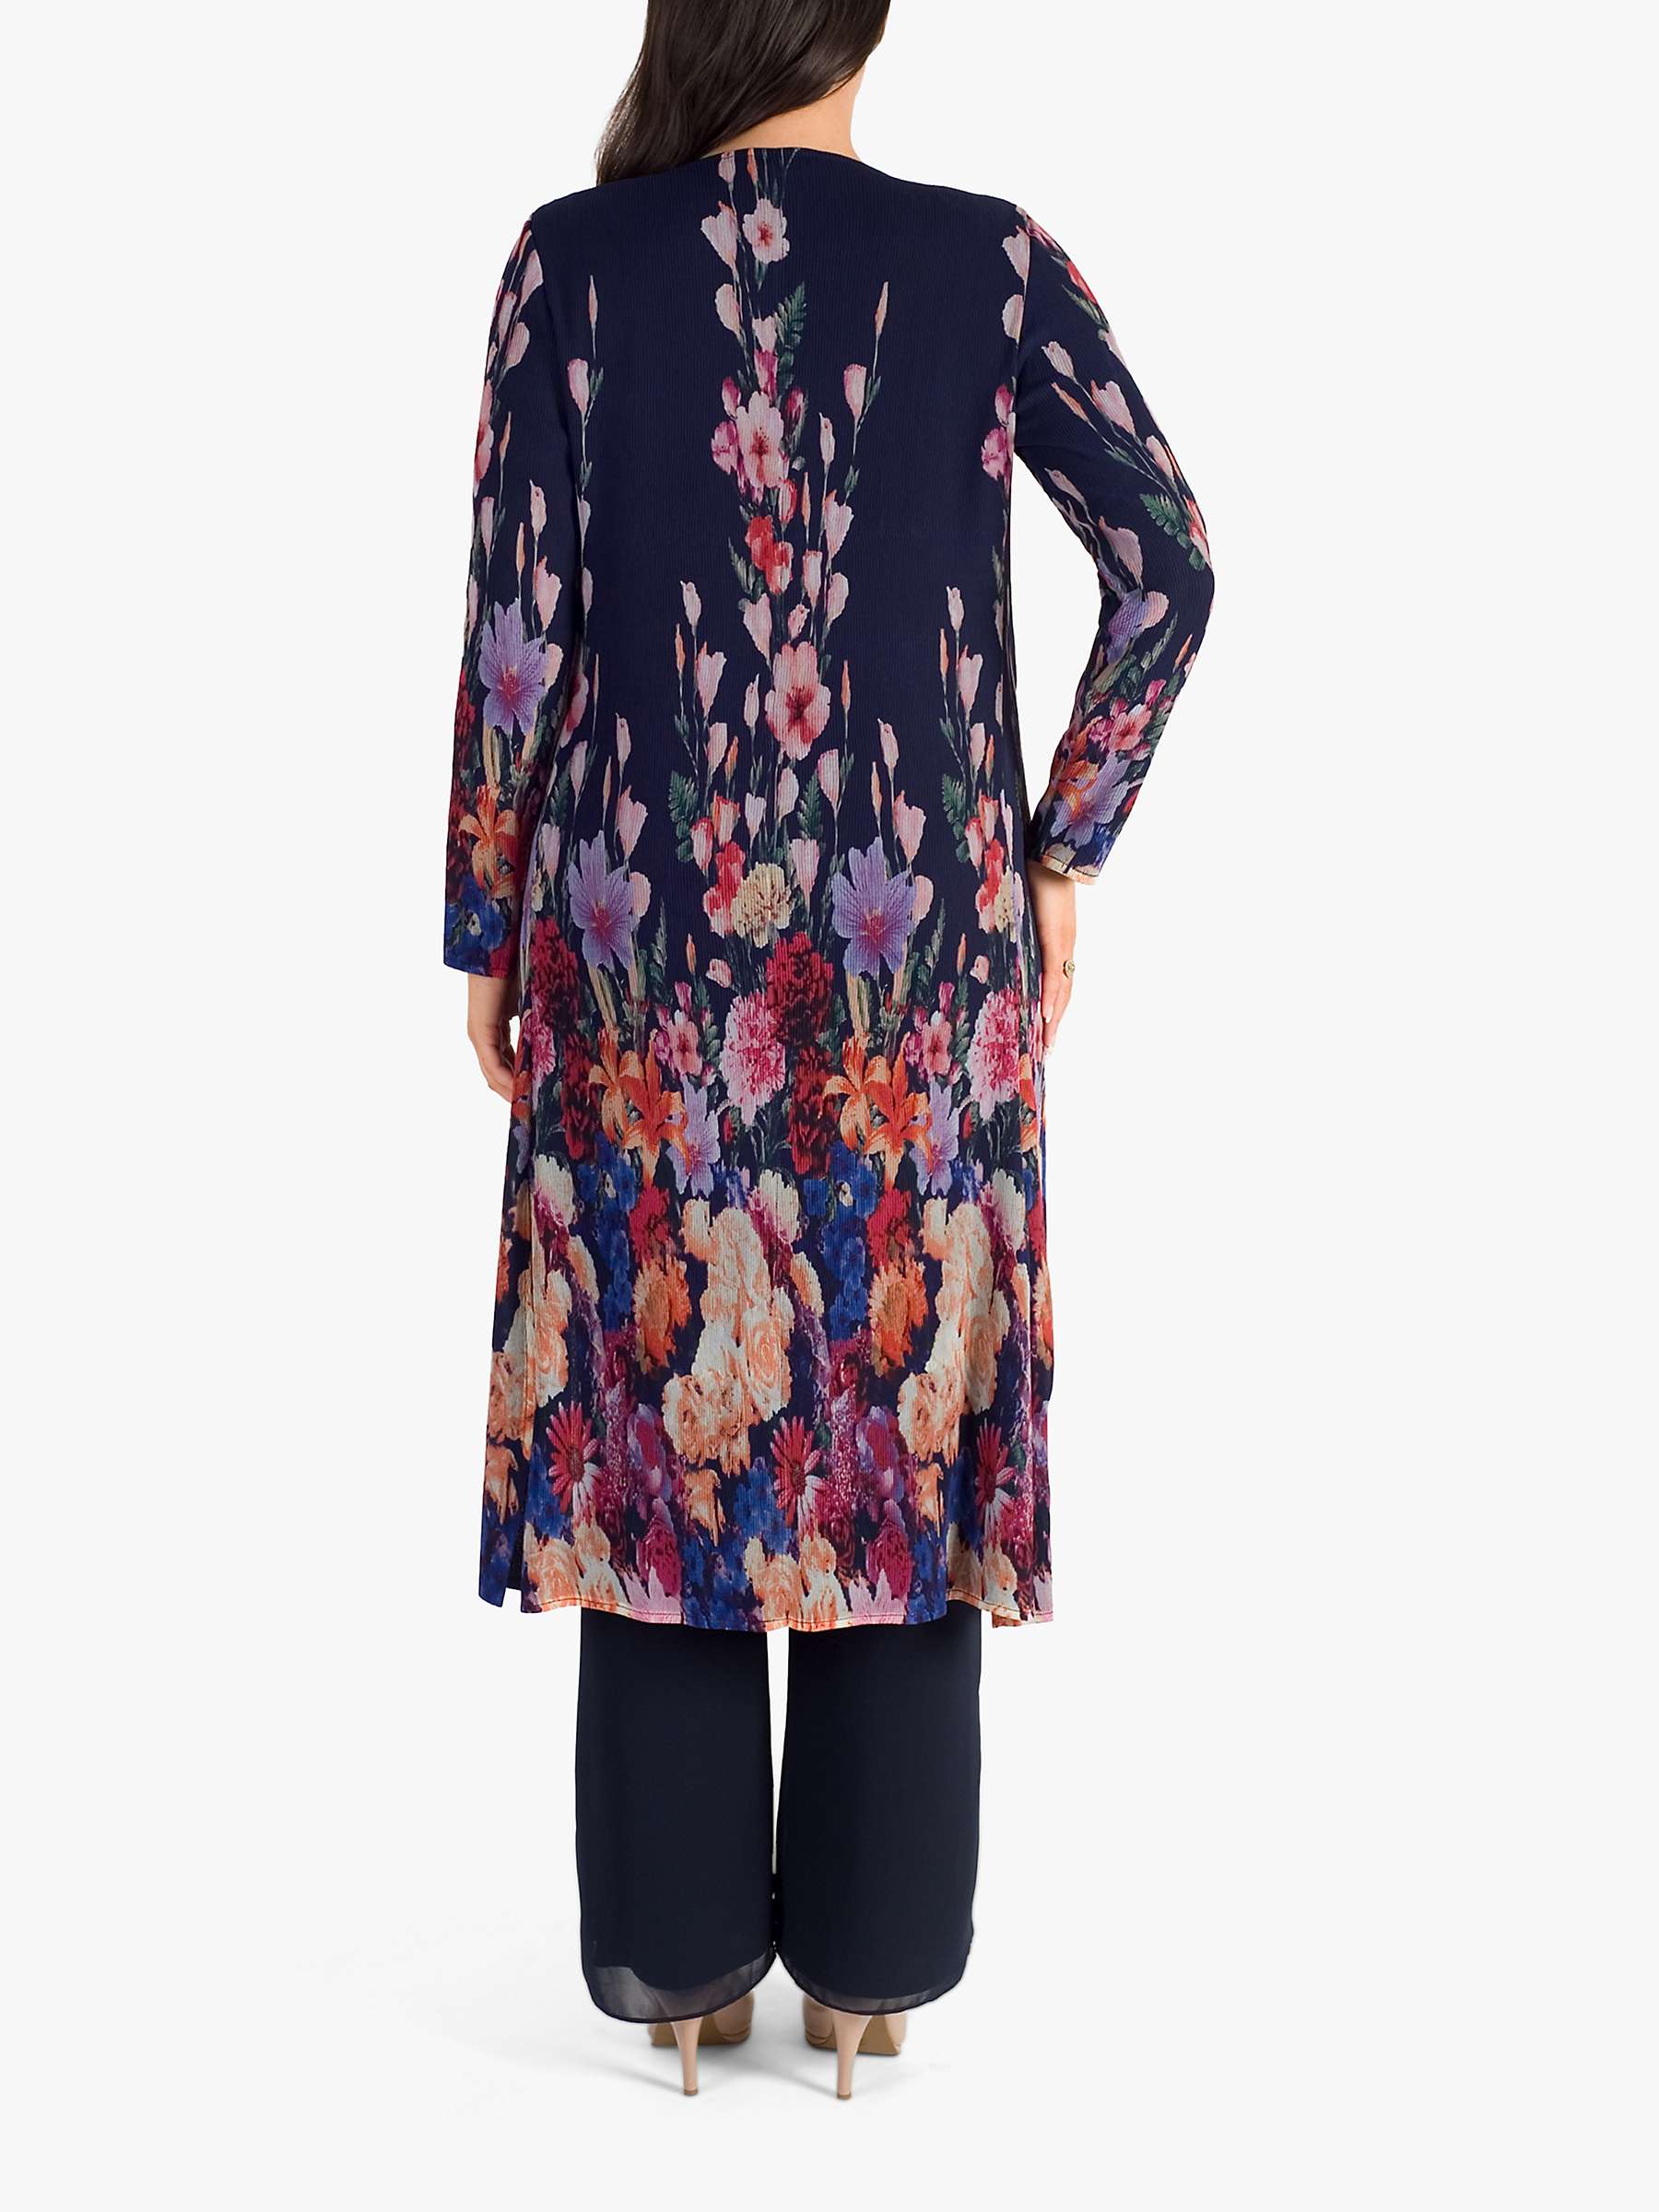 Buy chesca Floral Coat, Navy/Multi Online at johnlewis.com